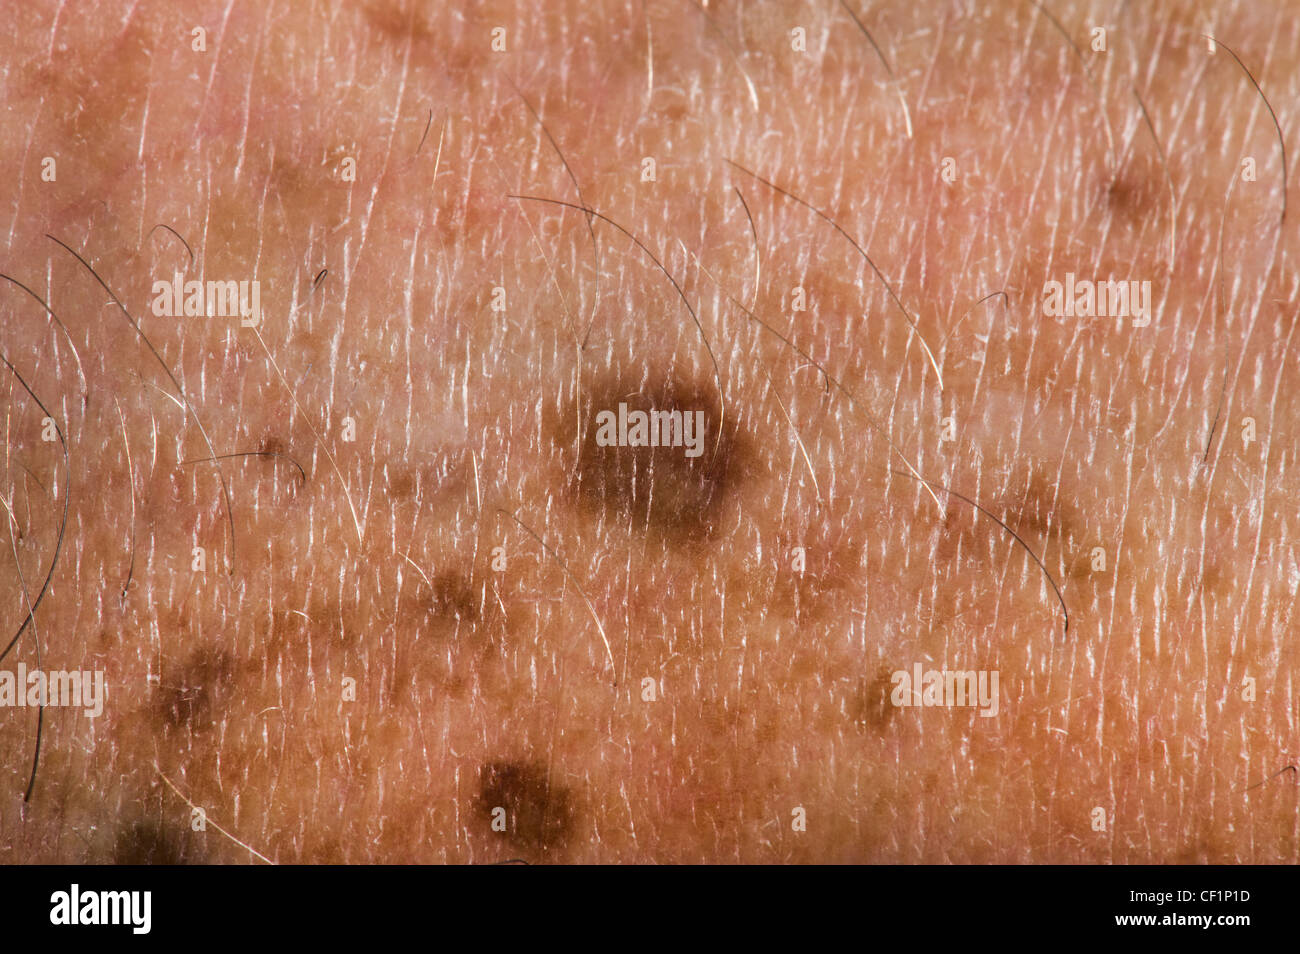 Age Spots Spot Skin Old Problem Cancer Spotted Close Up Closeup Makro Macro Dot Brown Brownly Old Man Danger Dangerous Stock Photo Alamy